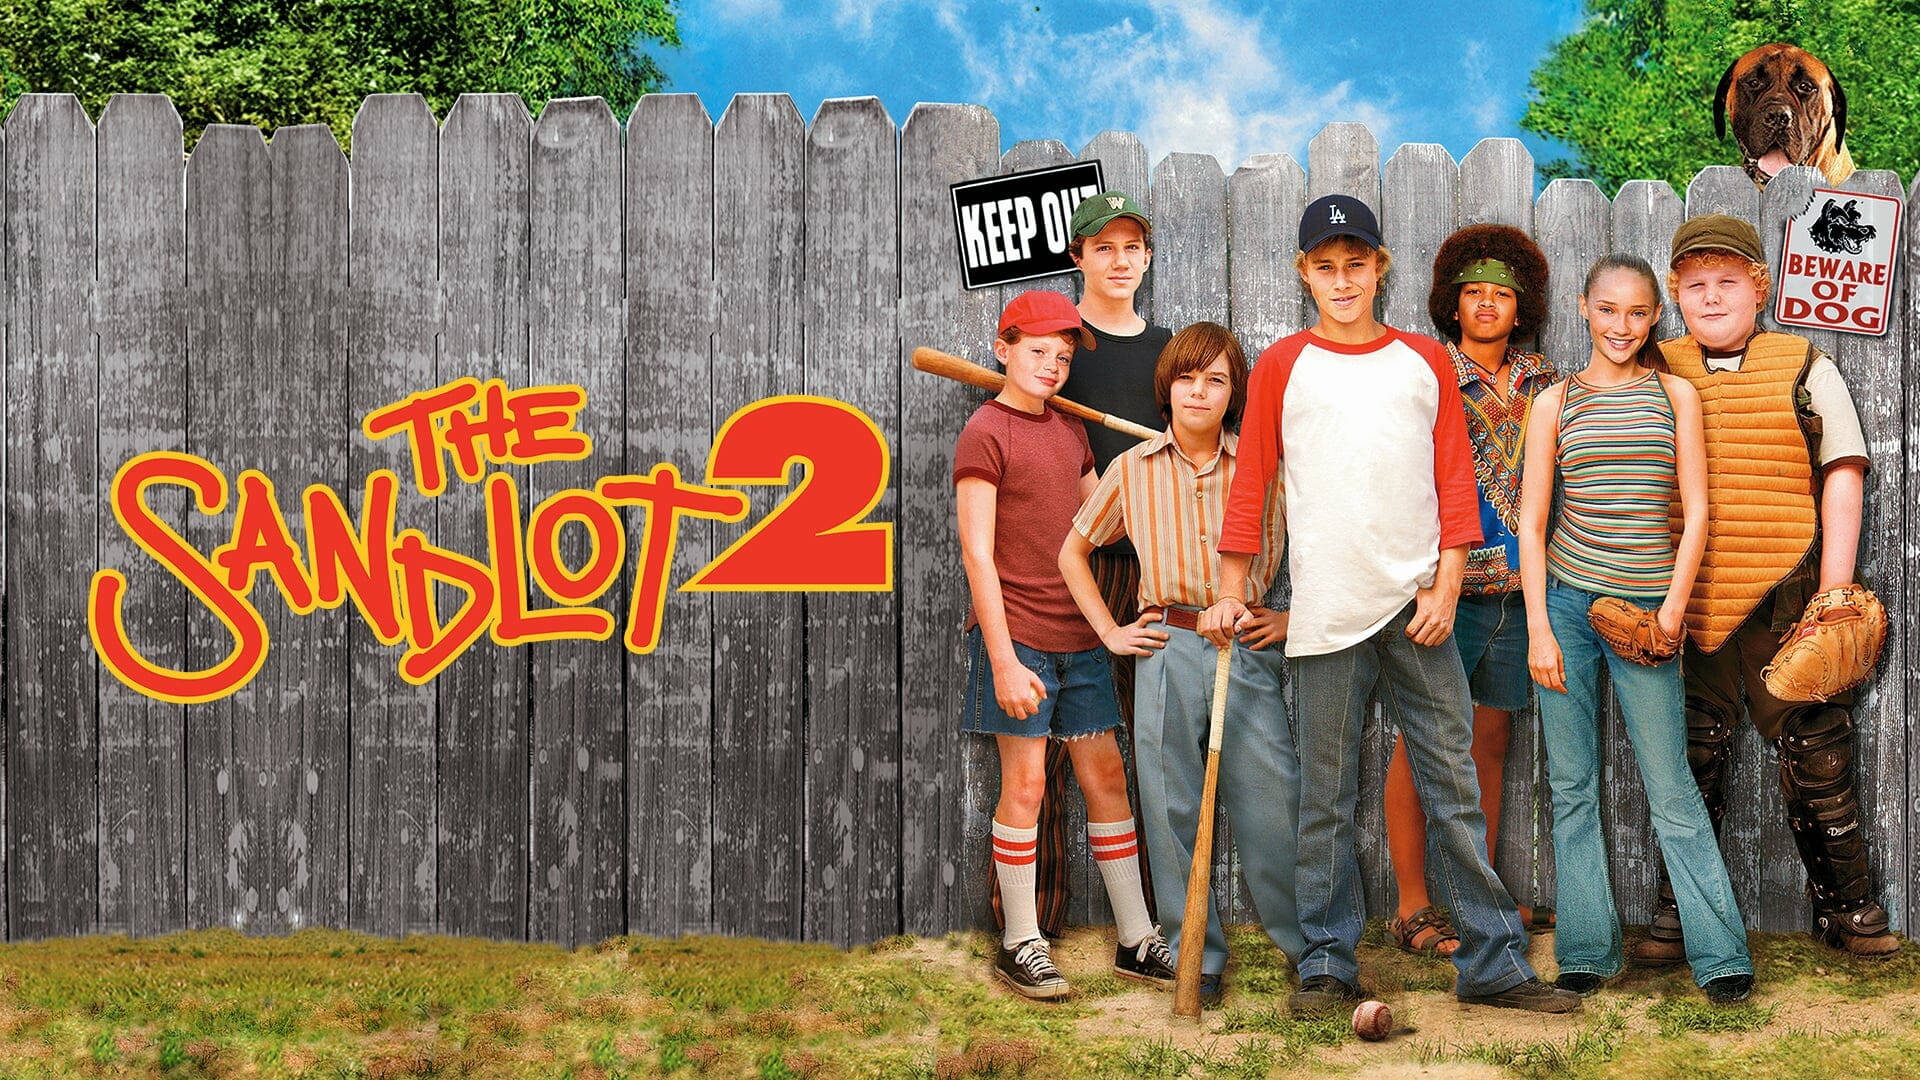 The Sandlot 2 Poster With The Characters Standing In Front Of A Fence Wallpaper